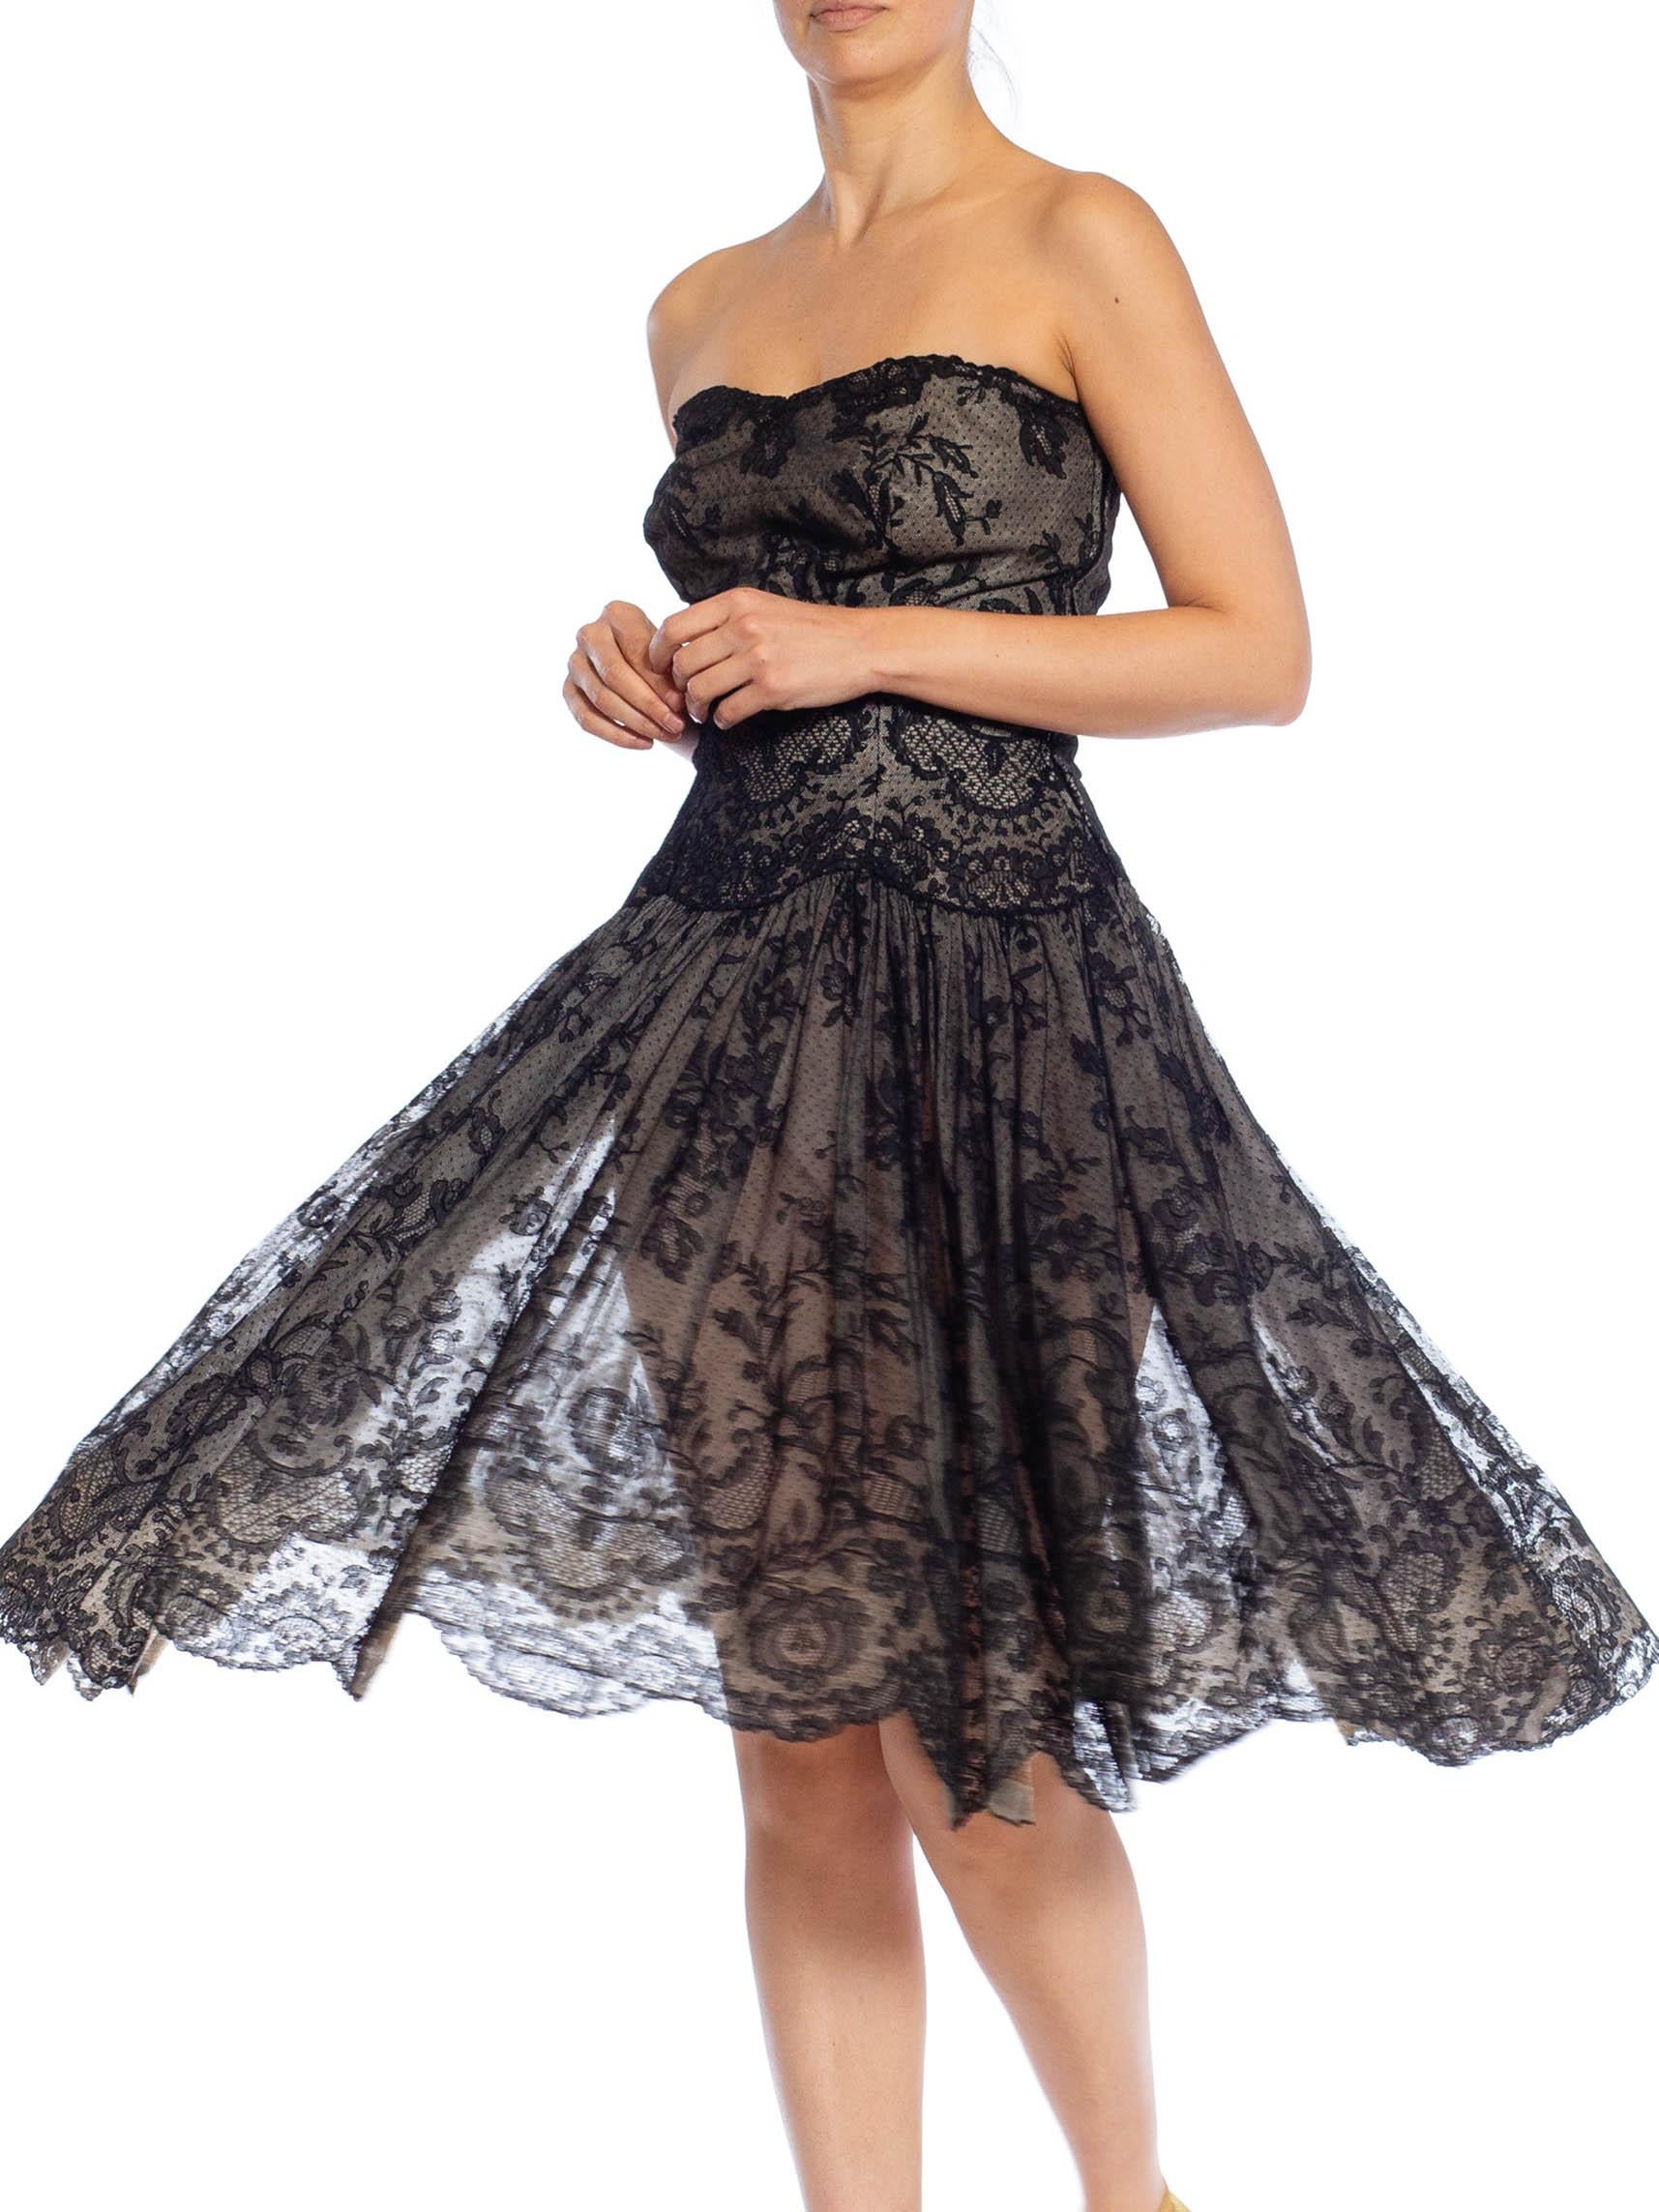 1950S Black Floral Lace Strapless Fit & Flare Cocktail Dress From Paris In Excellent Condition For Sale In New York, NY